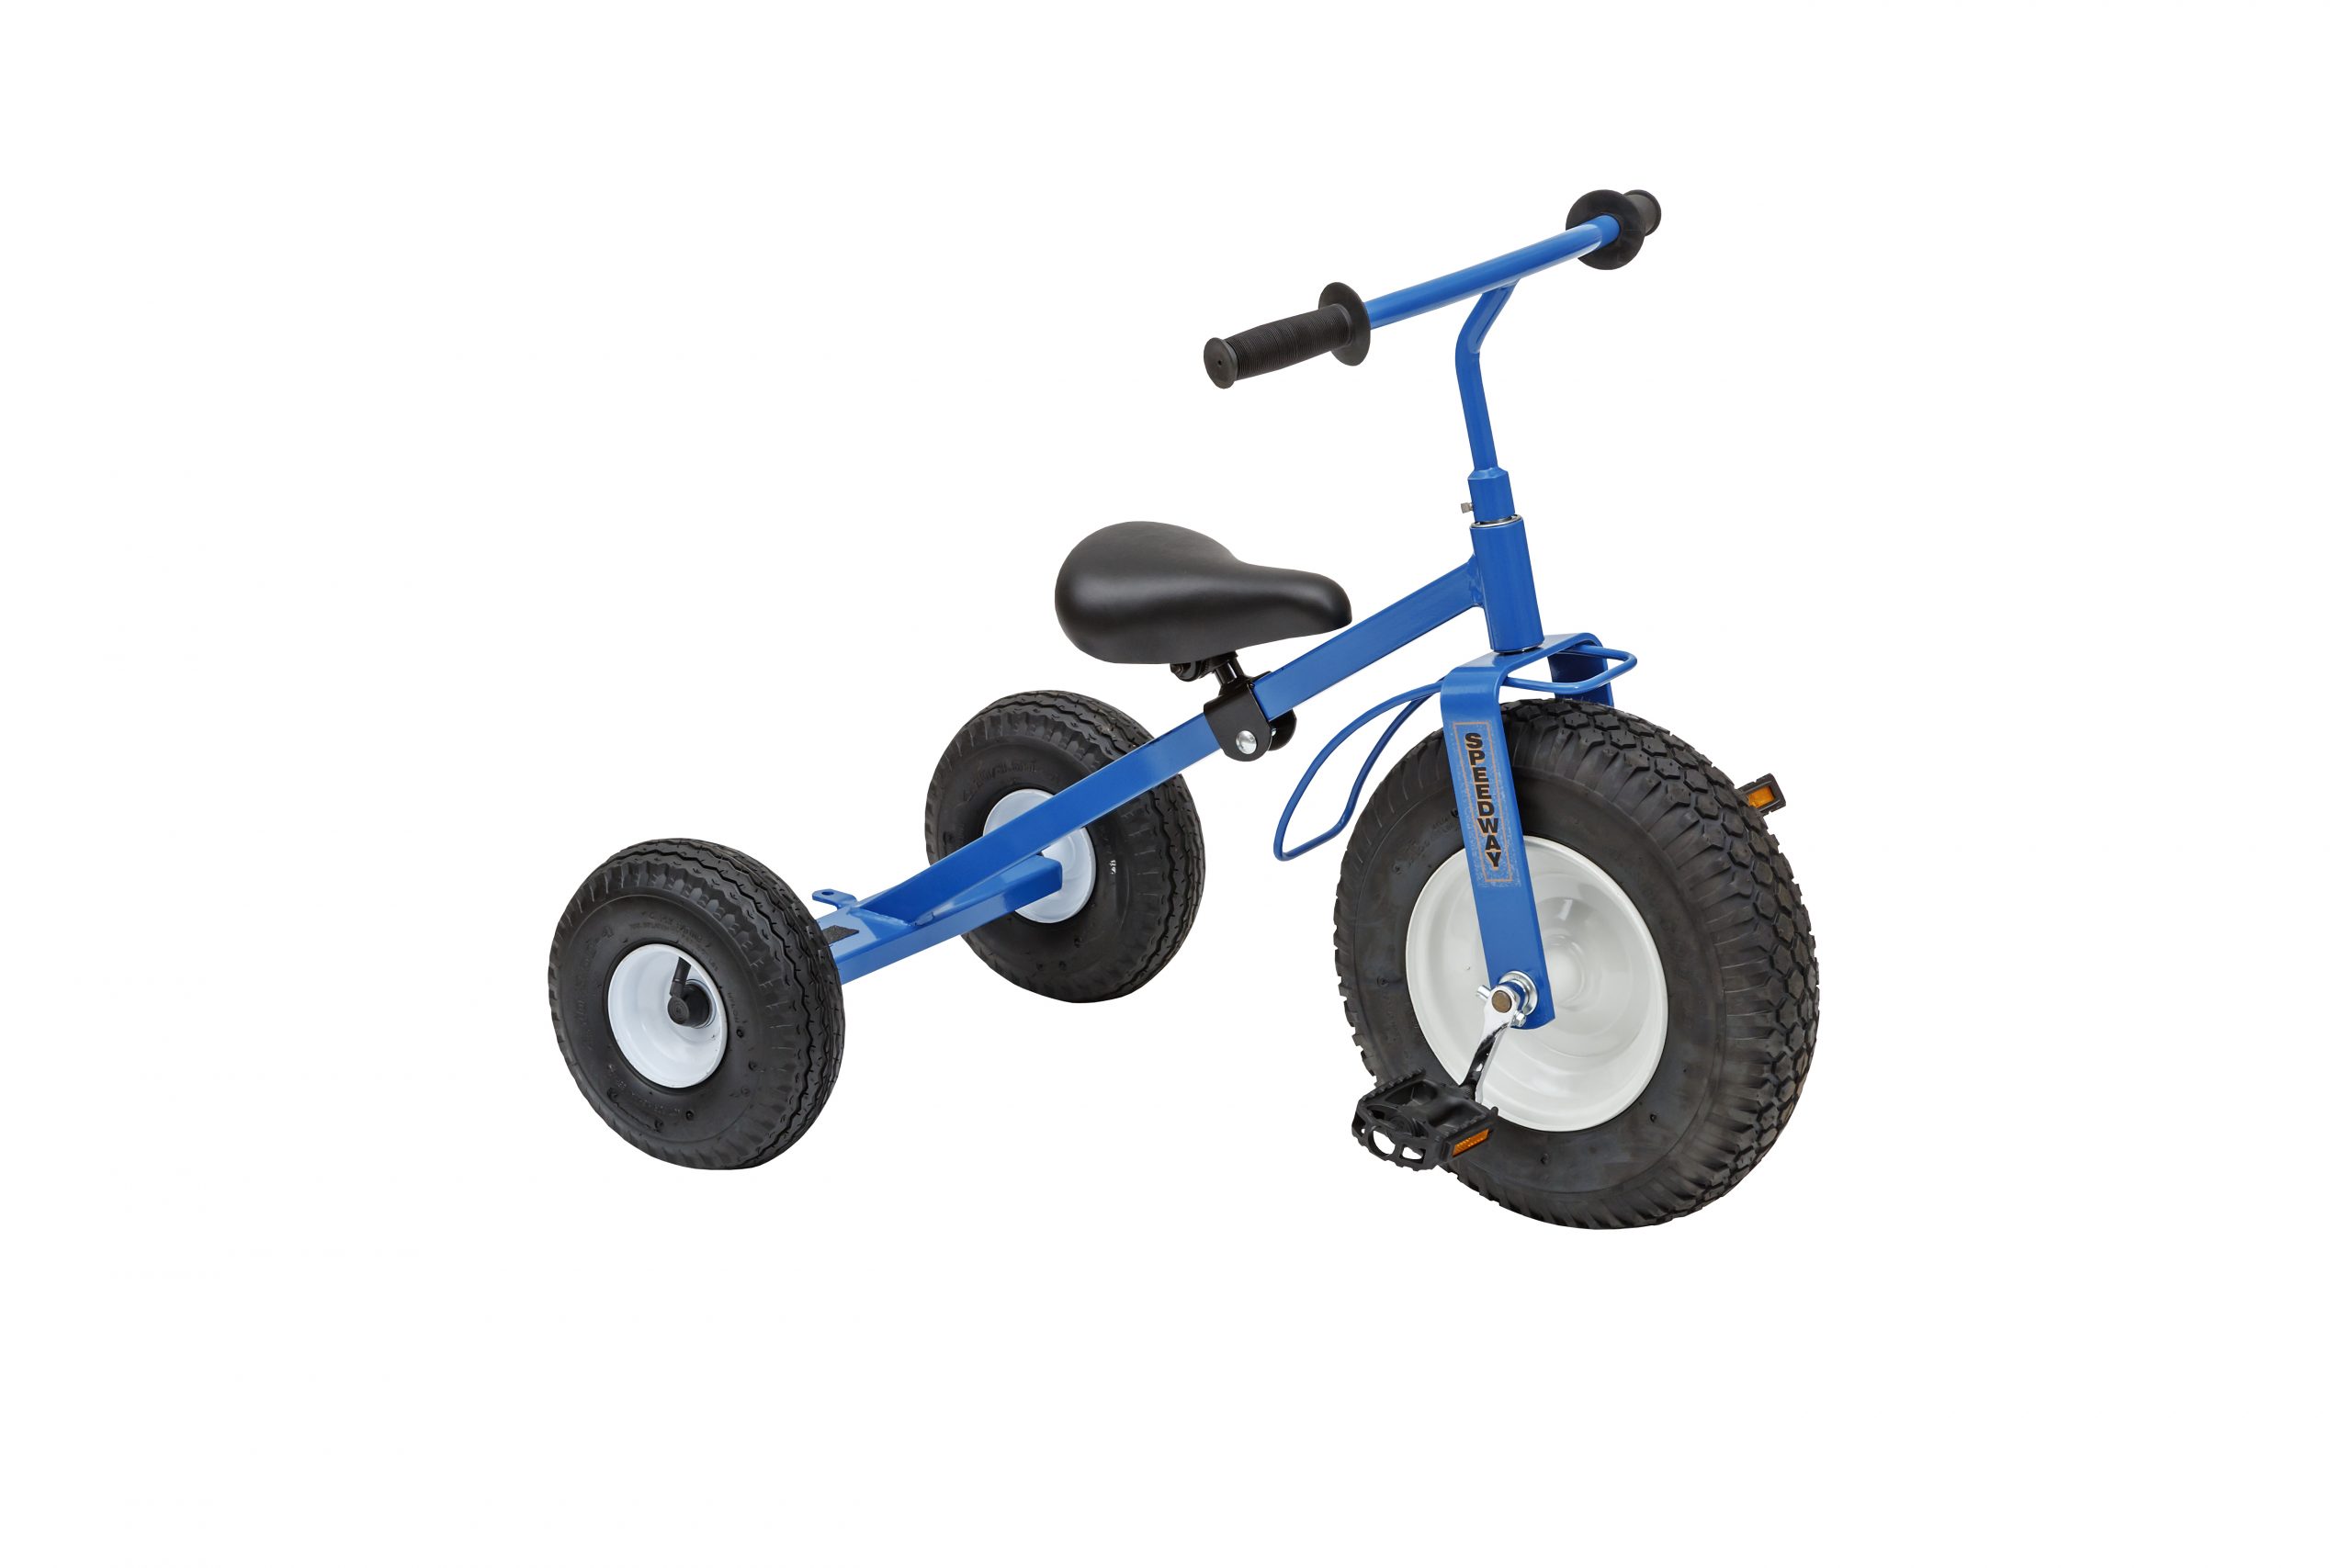 https://lappwagons.com/wp-content/uploads/1500-childrens-play-tricycle-scaled.jpg